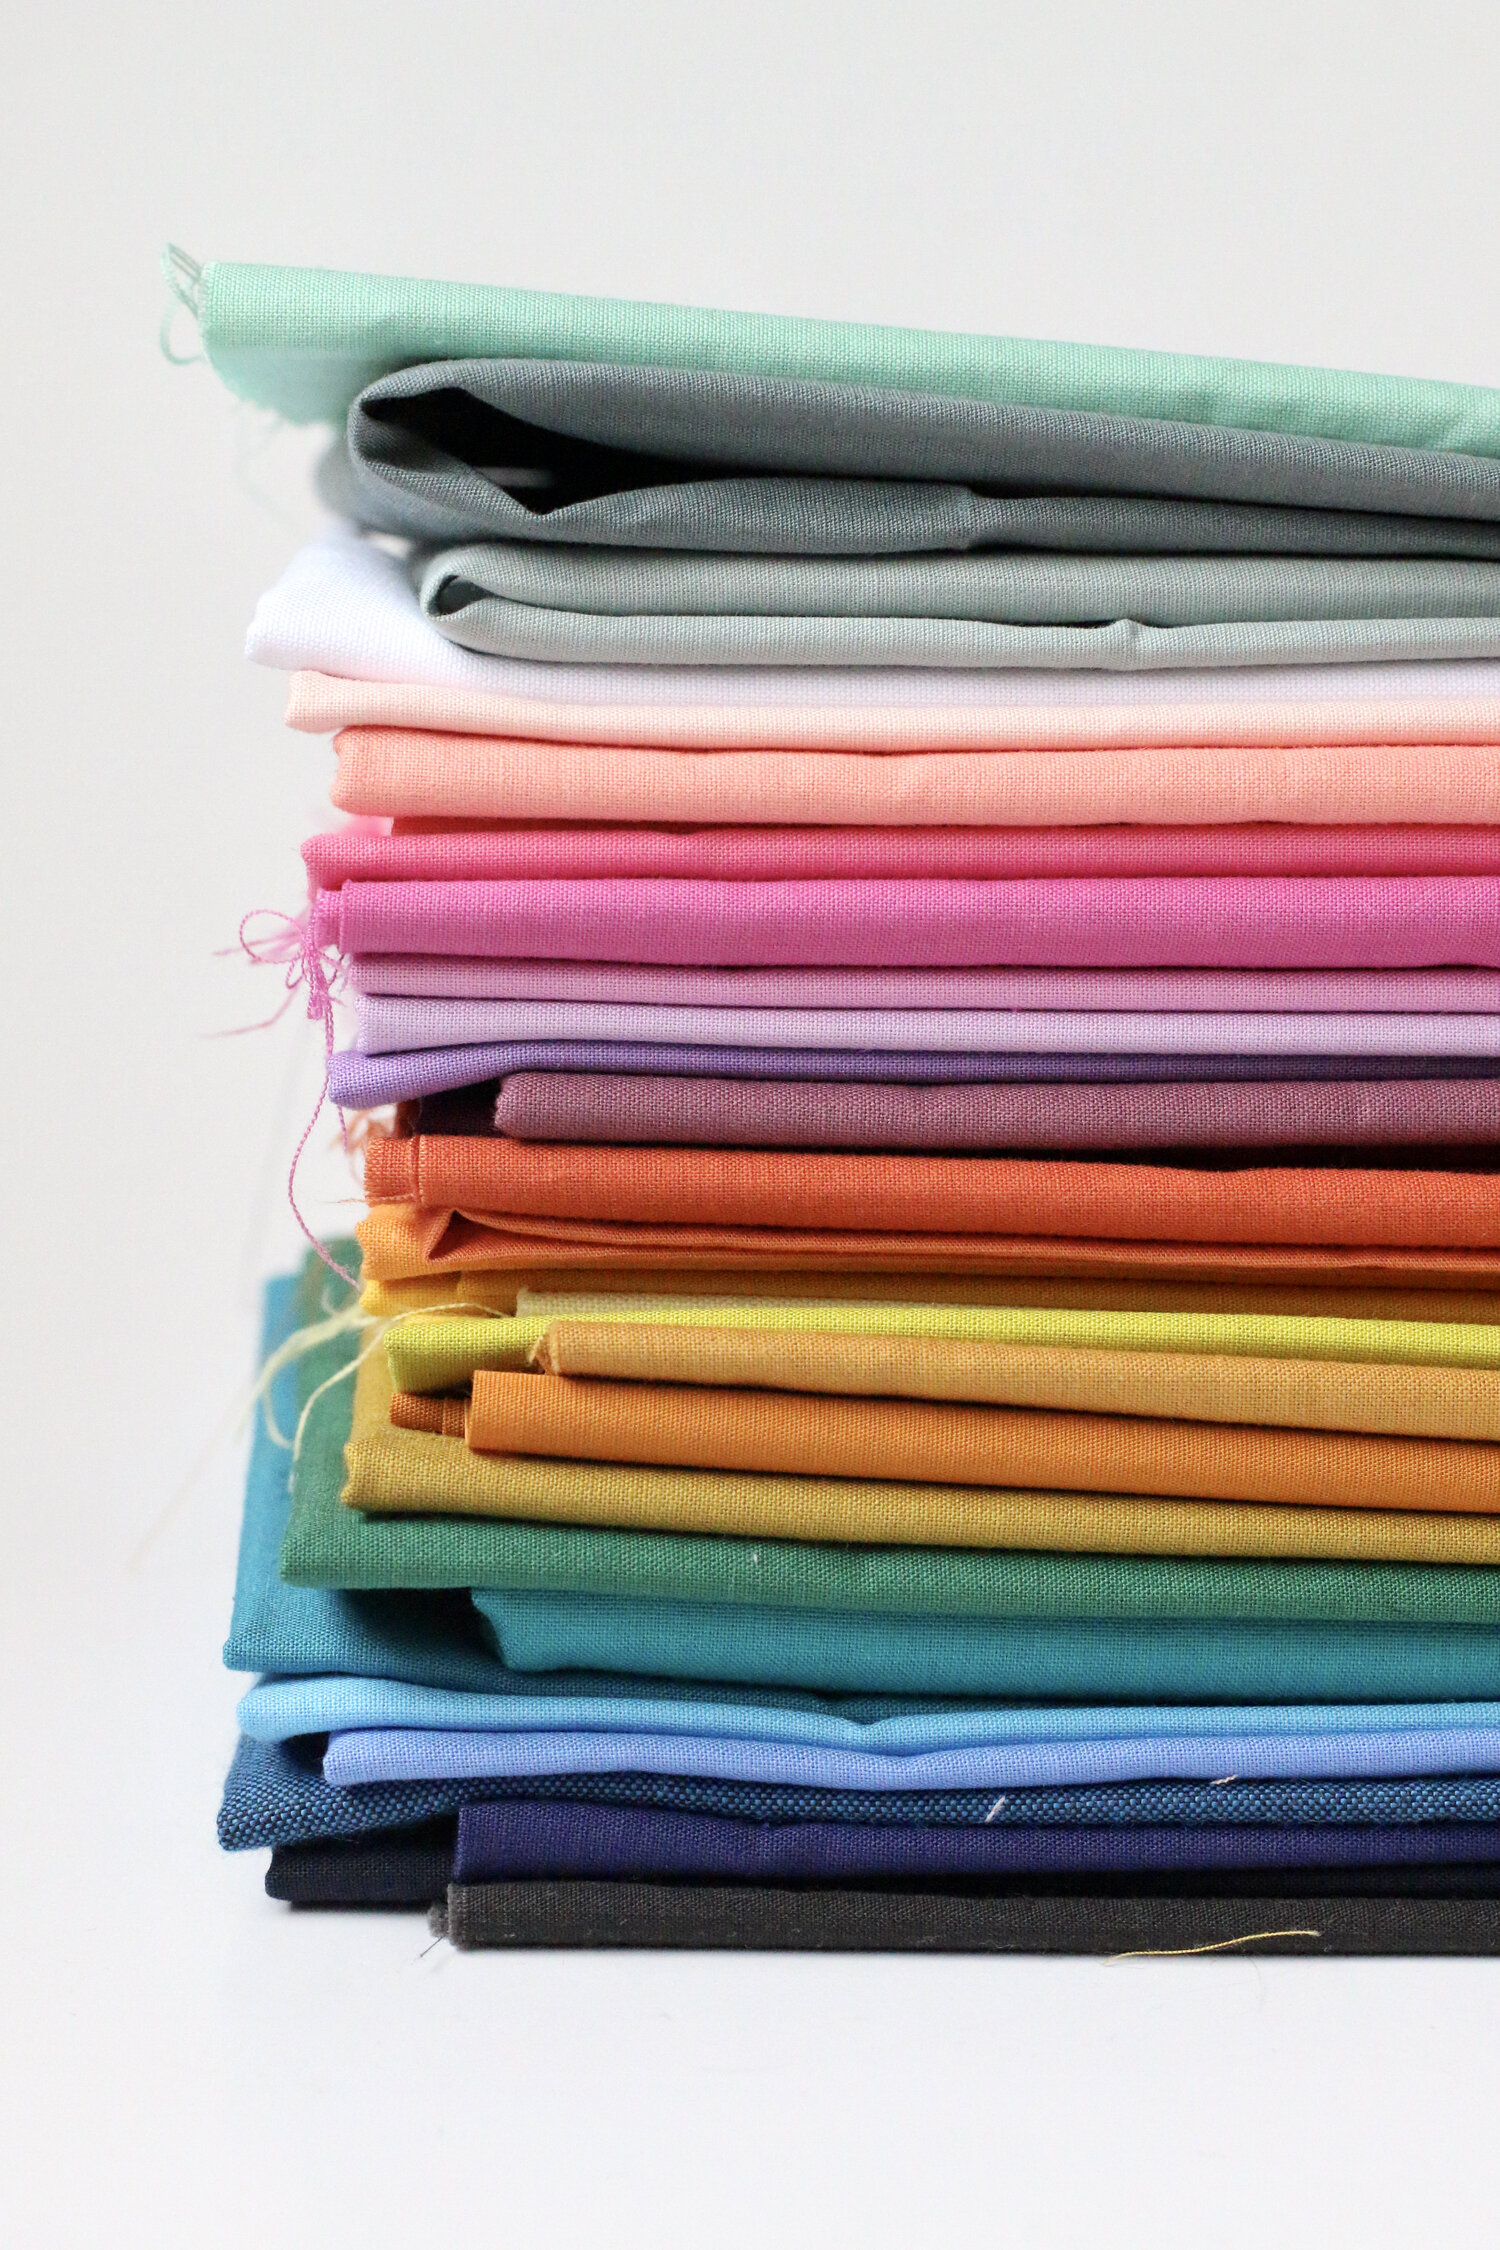 My solid fabrics in color order.